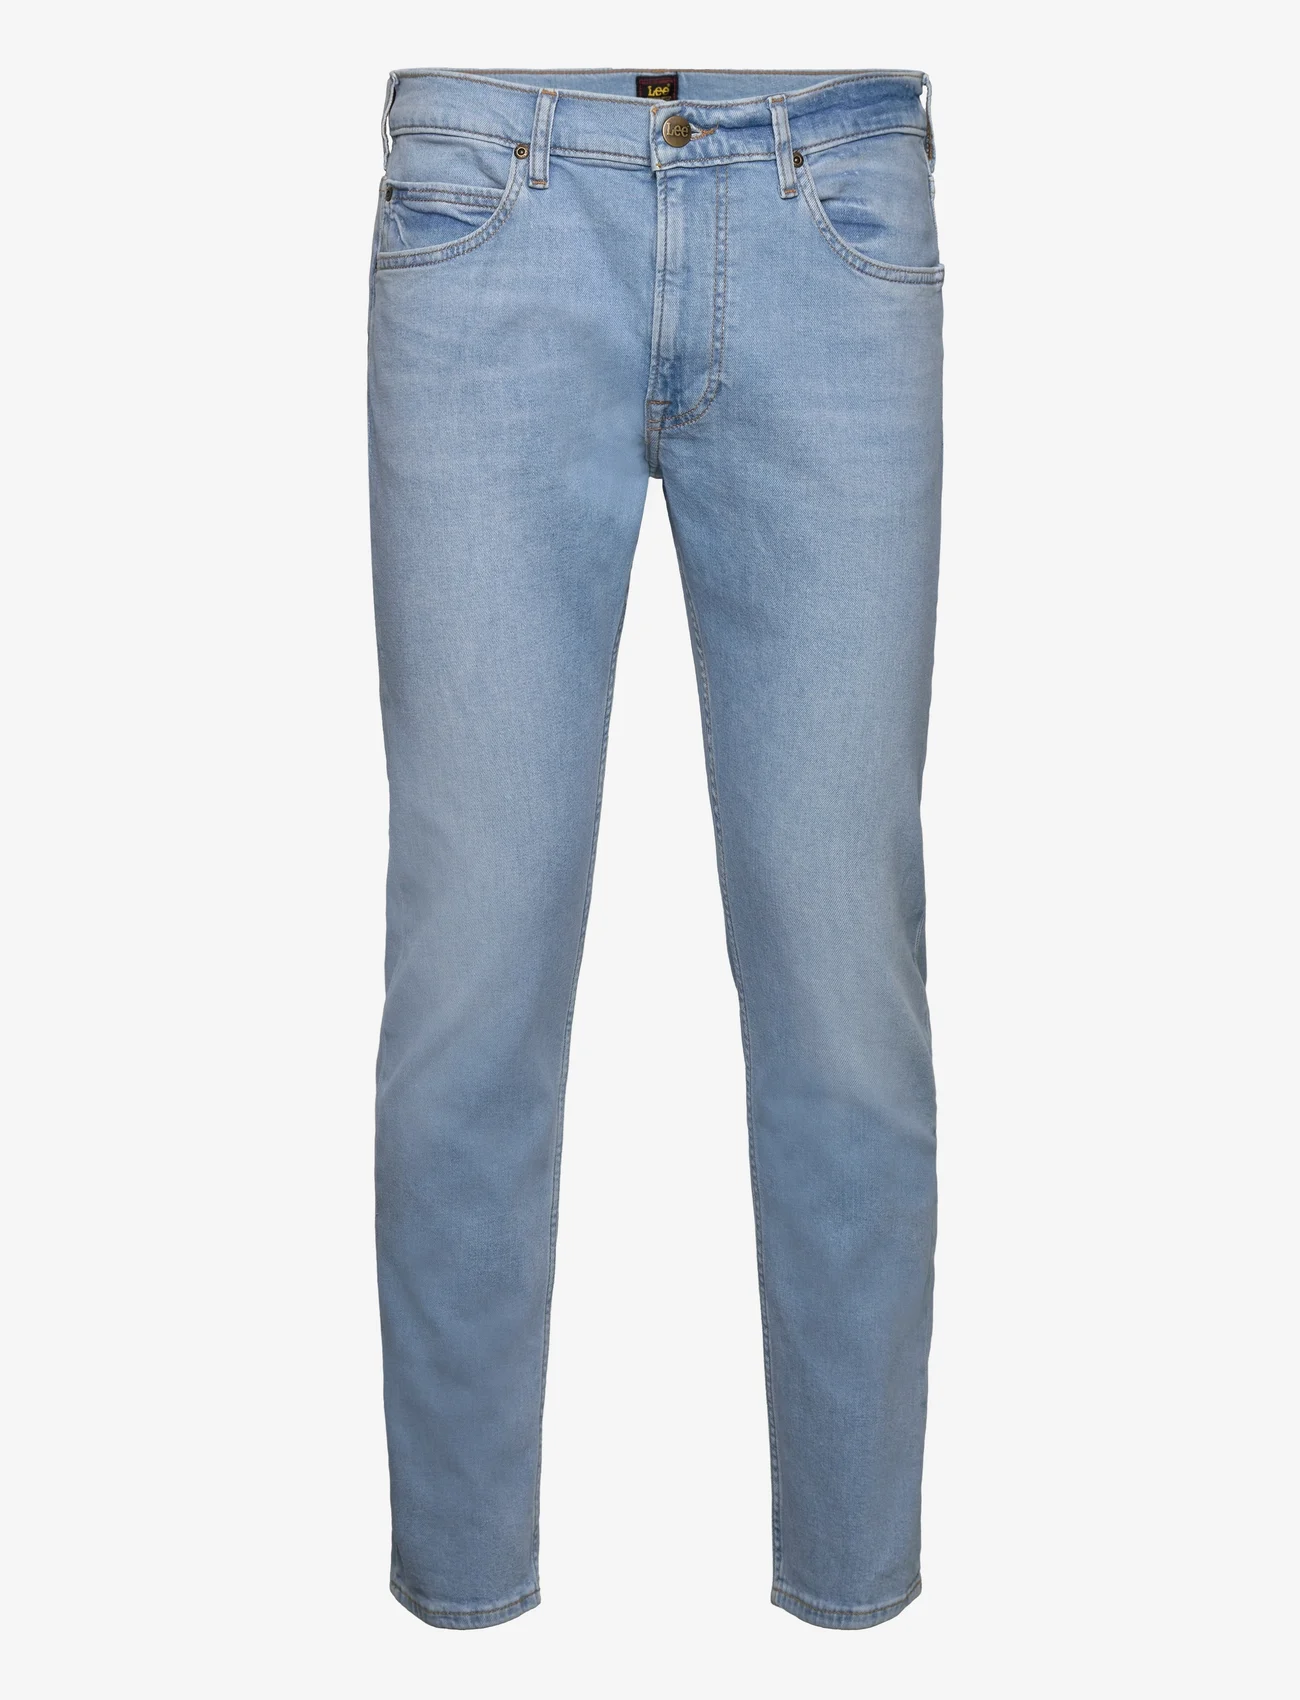 Lee Jeans - RIDER - slim fit jeans - river run - 0